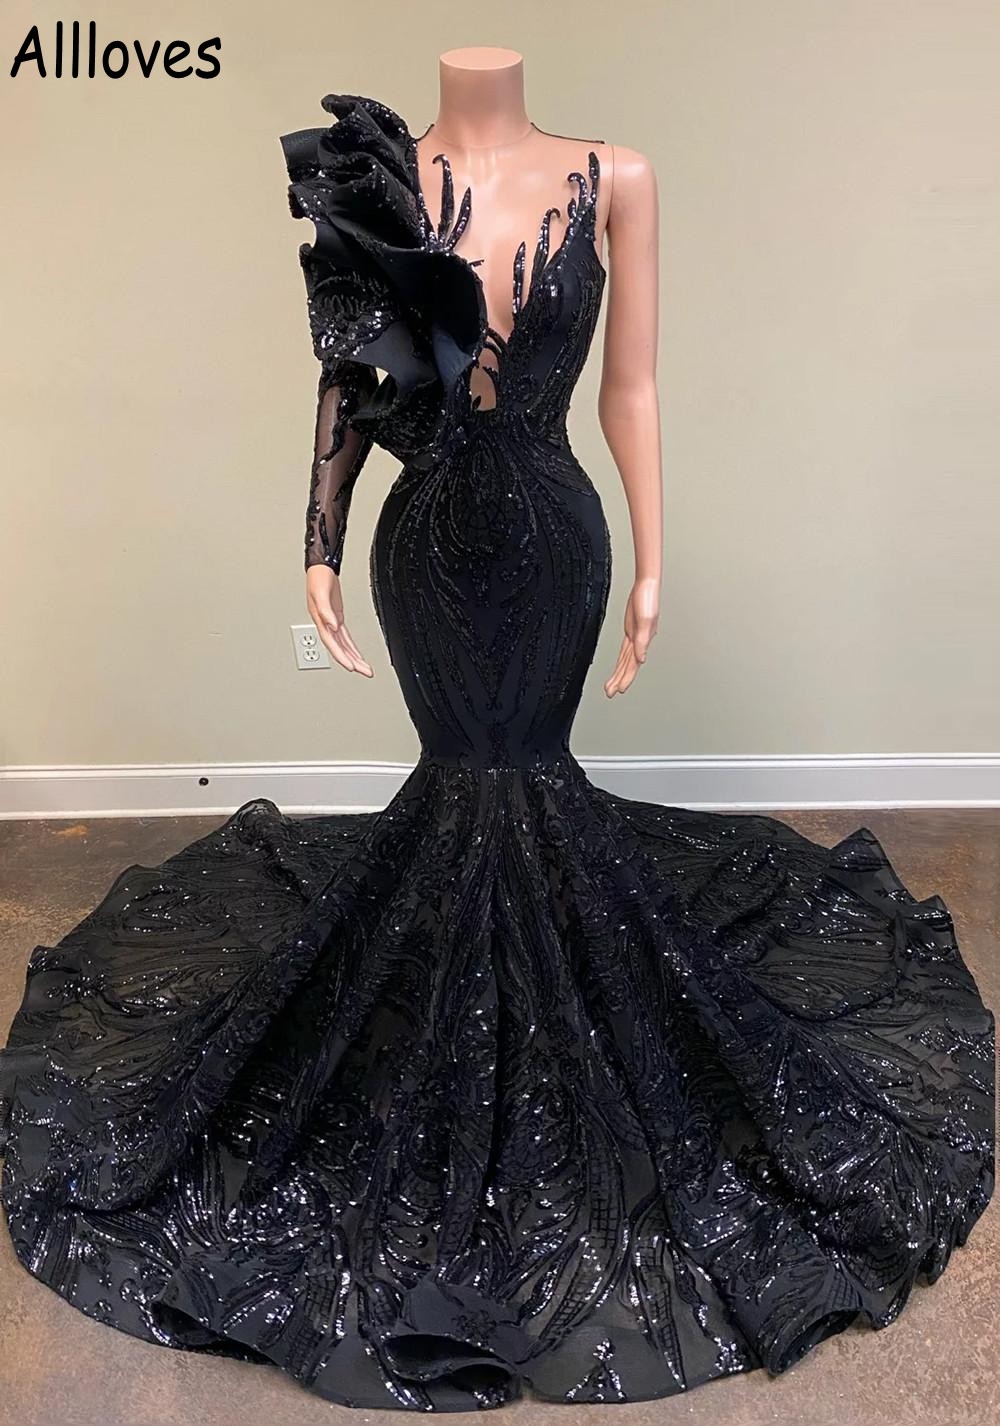 Vintage Black Sequined Lace Mermaid Evening Dresses Arabic Aso Ebi Sexy Sheer Neck One Shoulder Long Sleeve Prom Party Gowns For Women Formal Occasion Dress CL1478